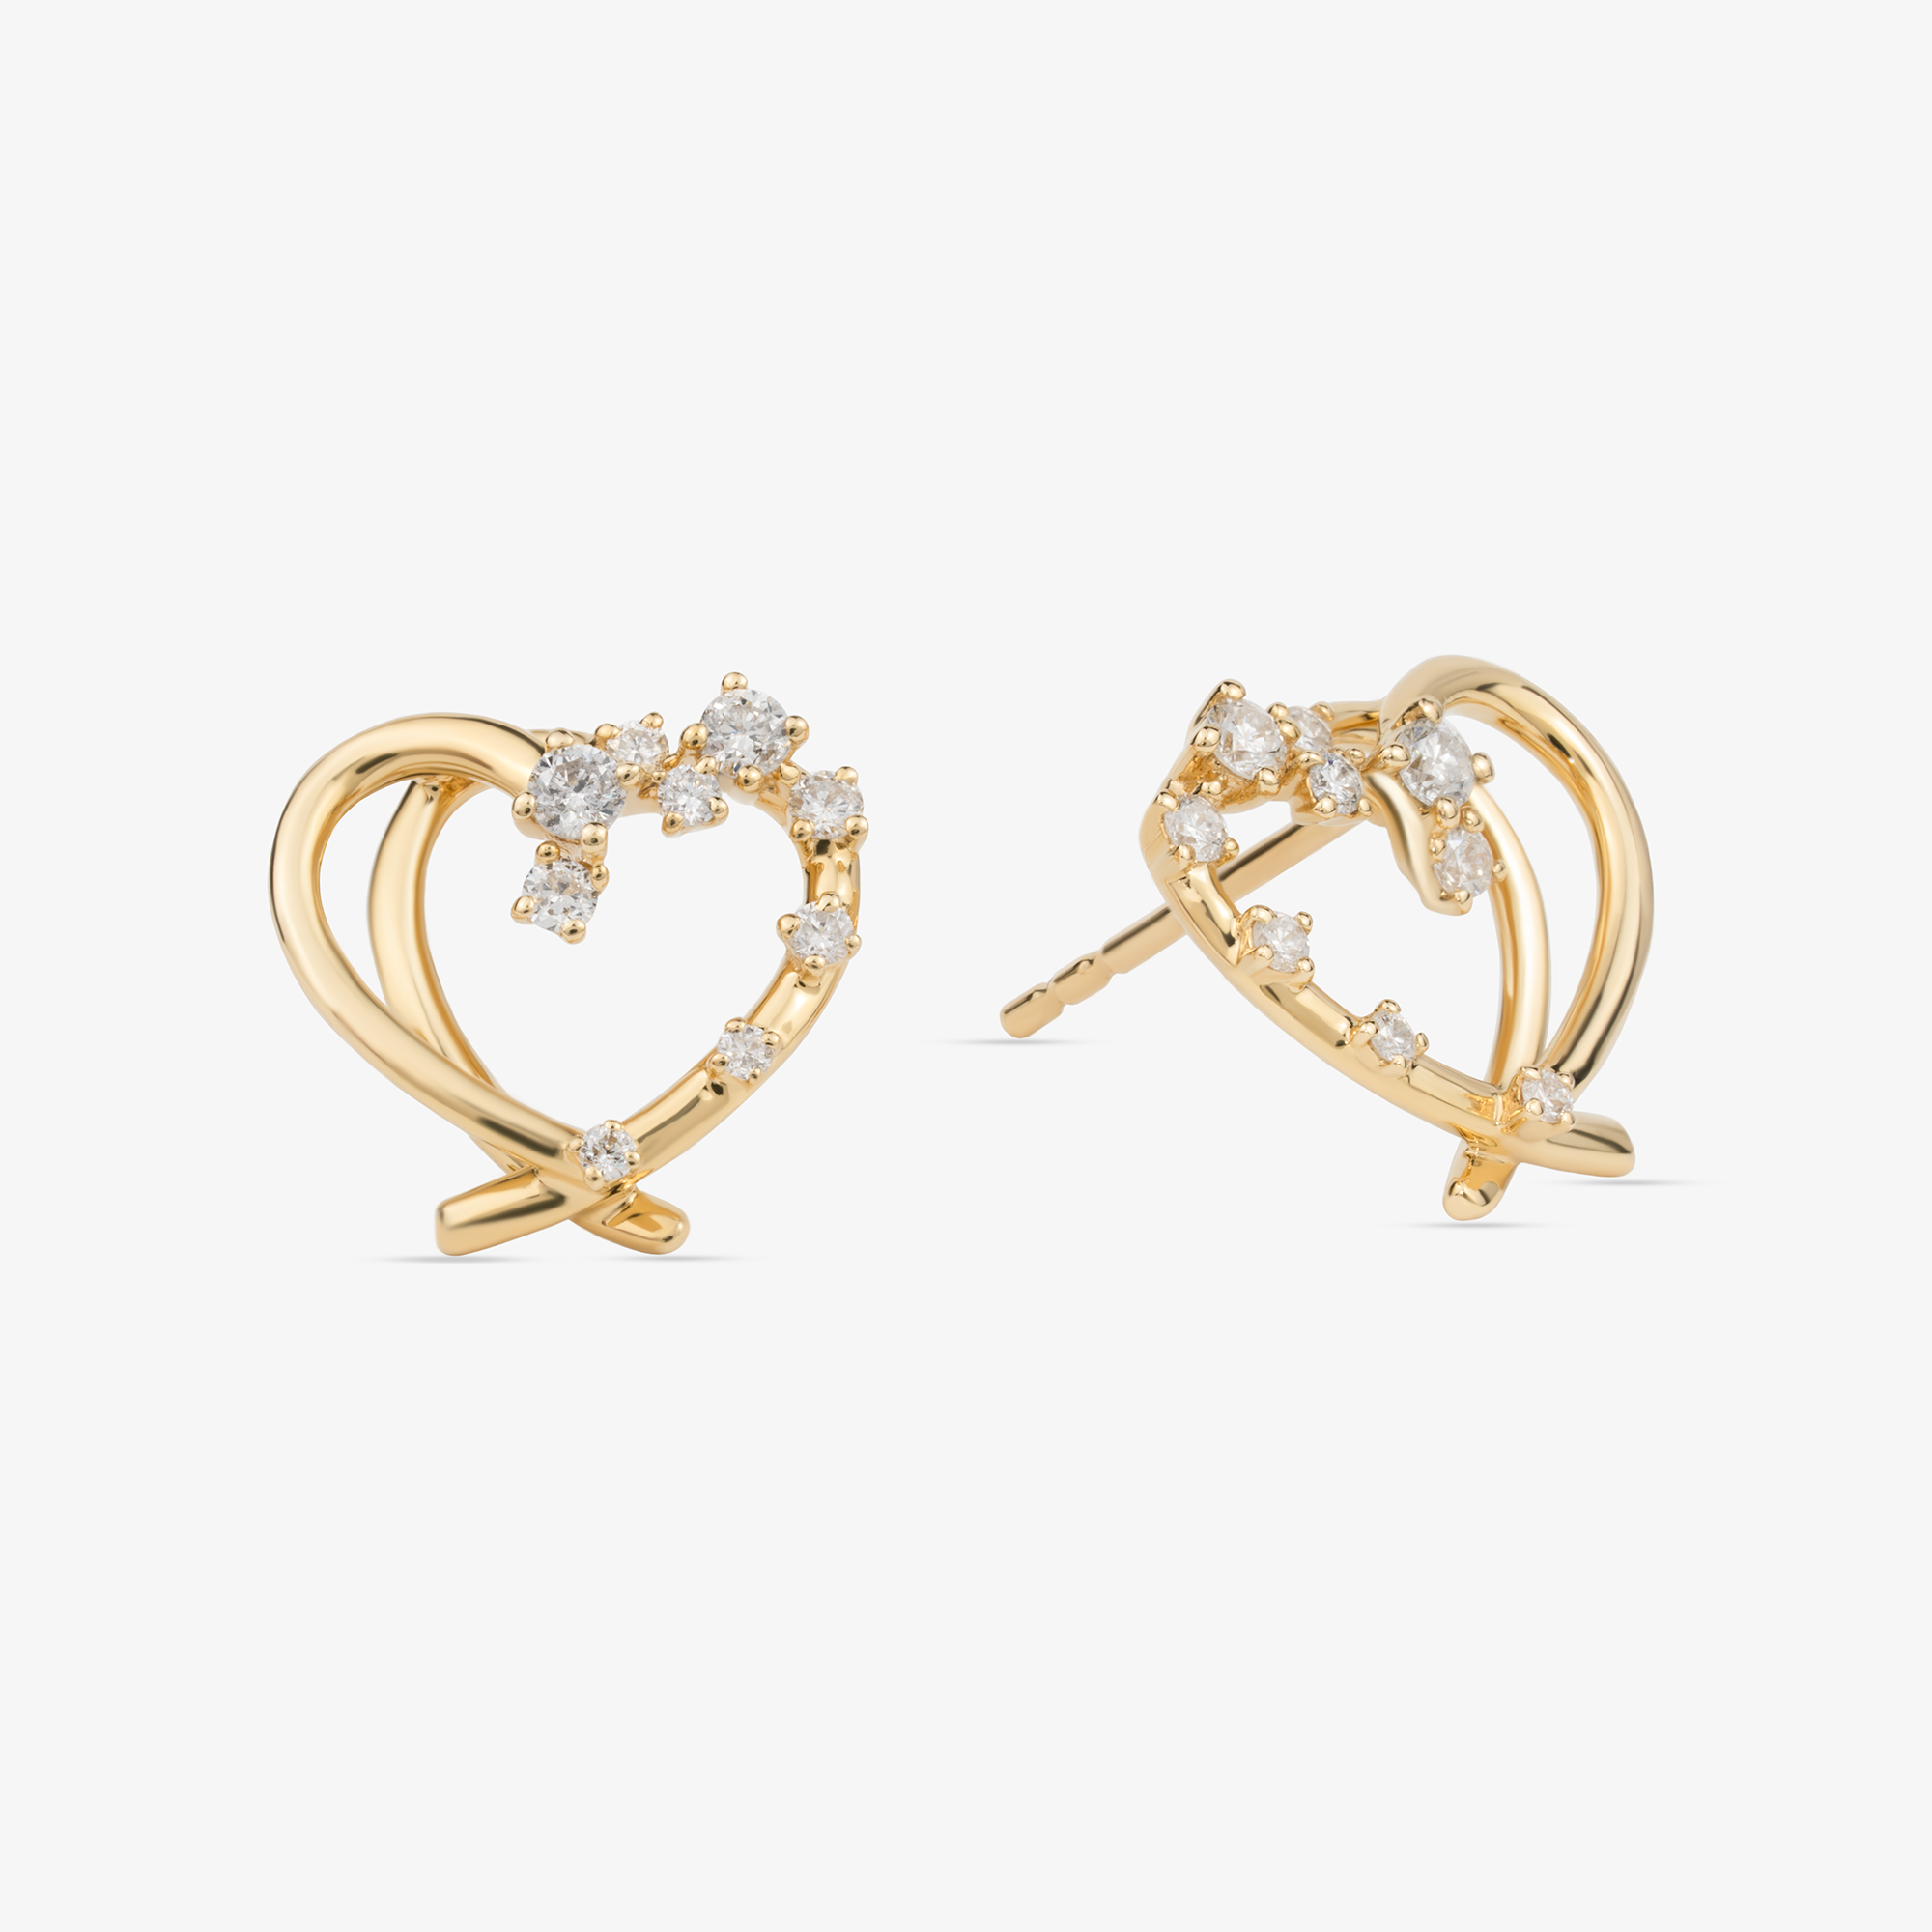 Heart Earrings In 18K Solid Yellow Gold With Diamonds